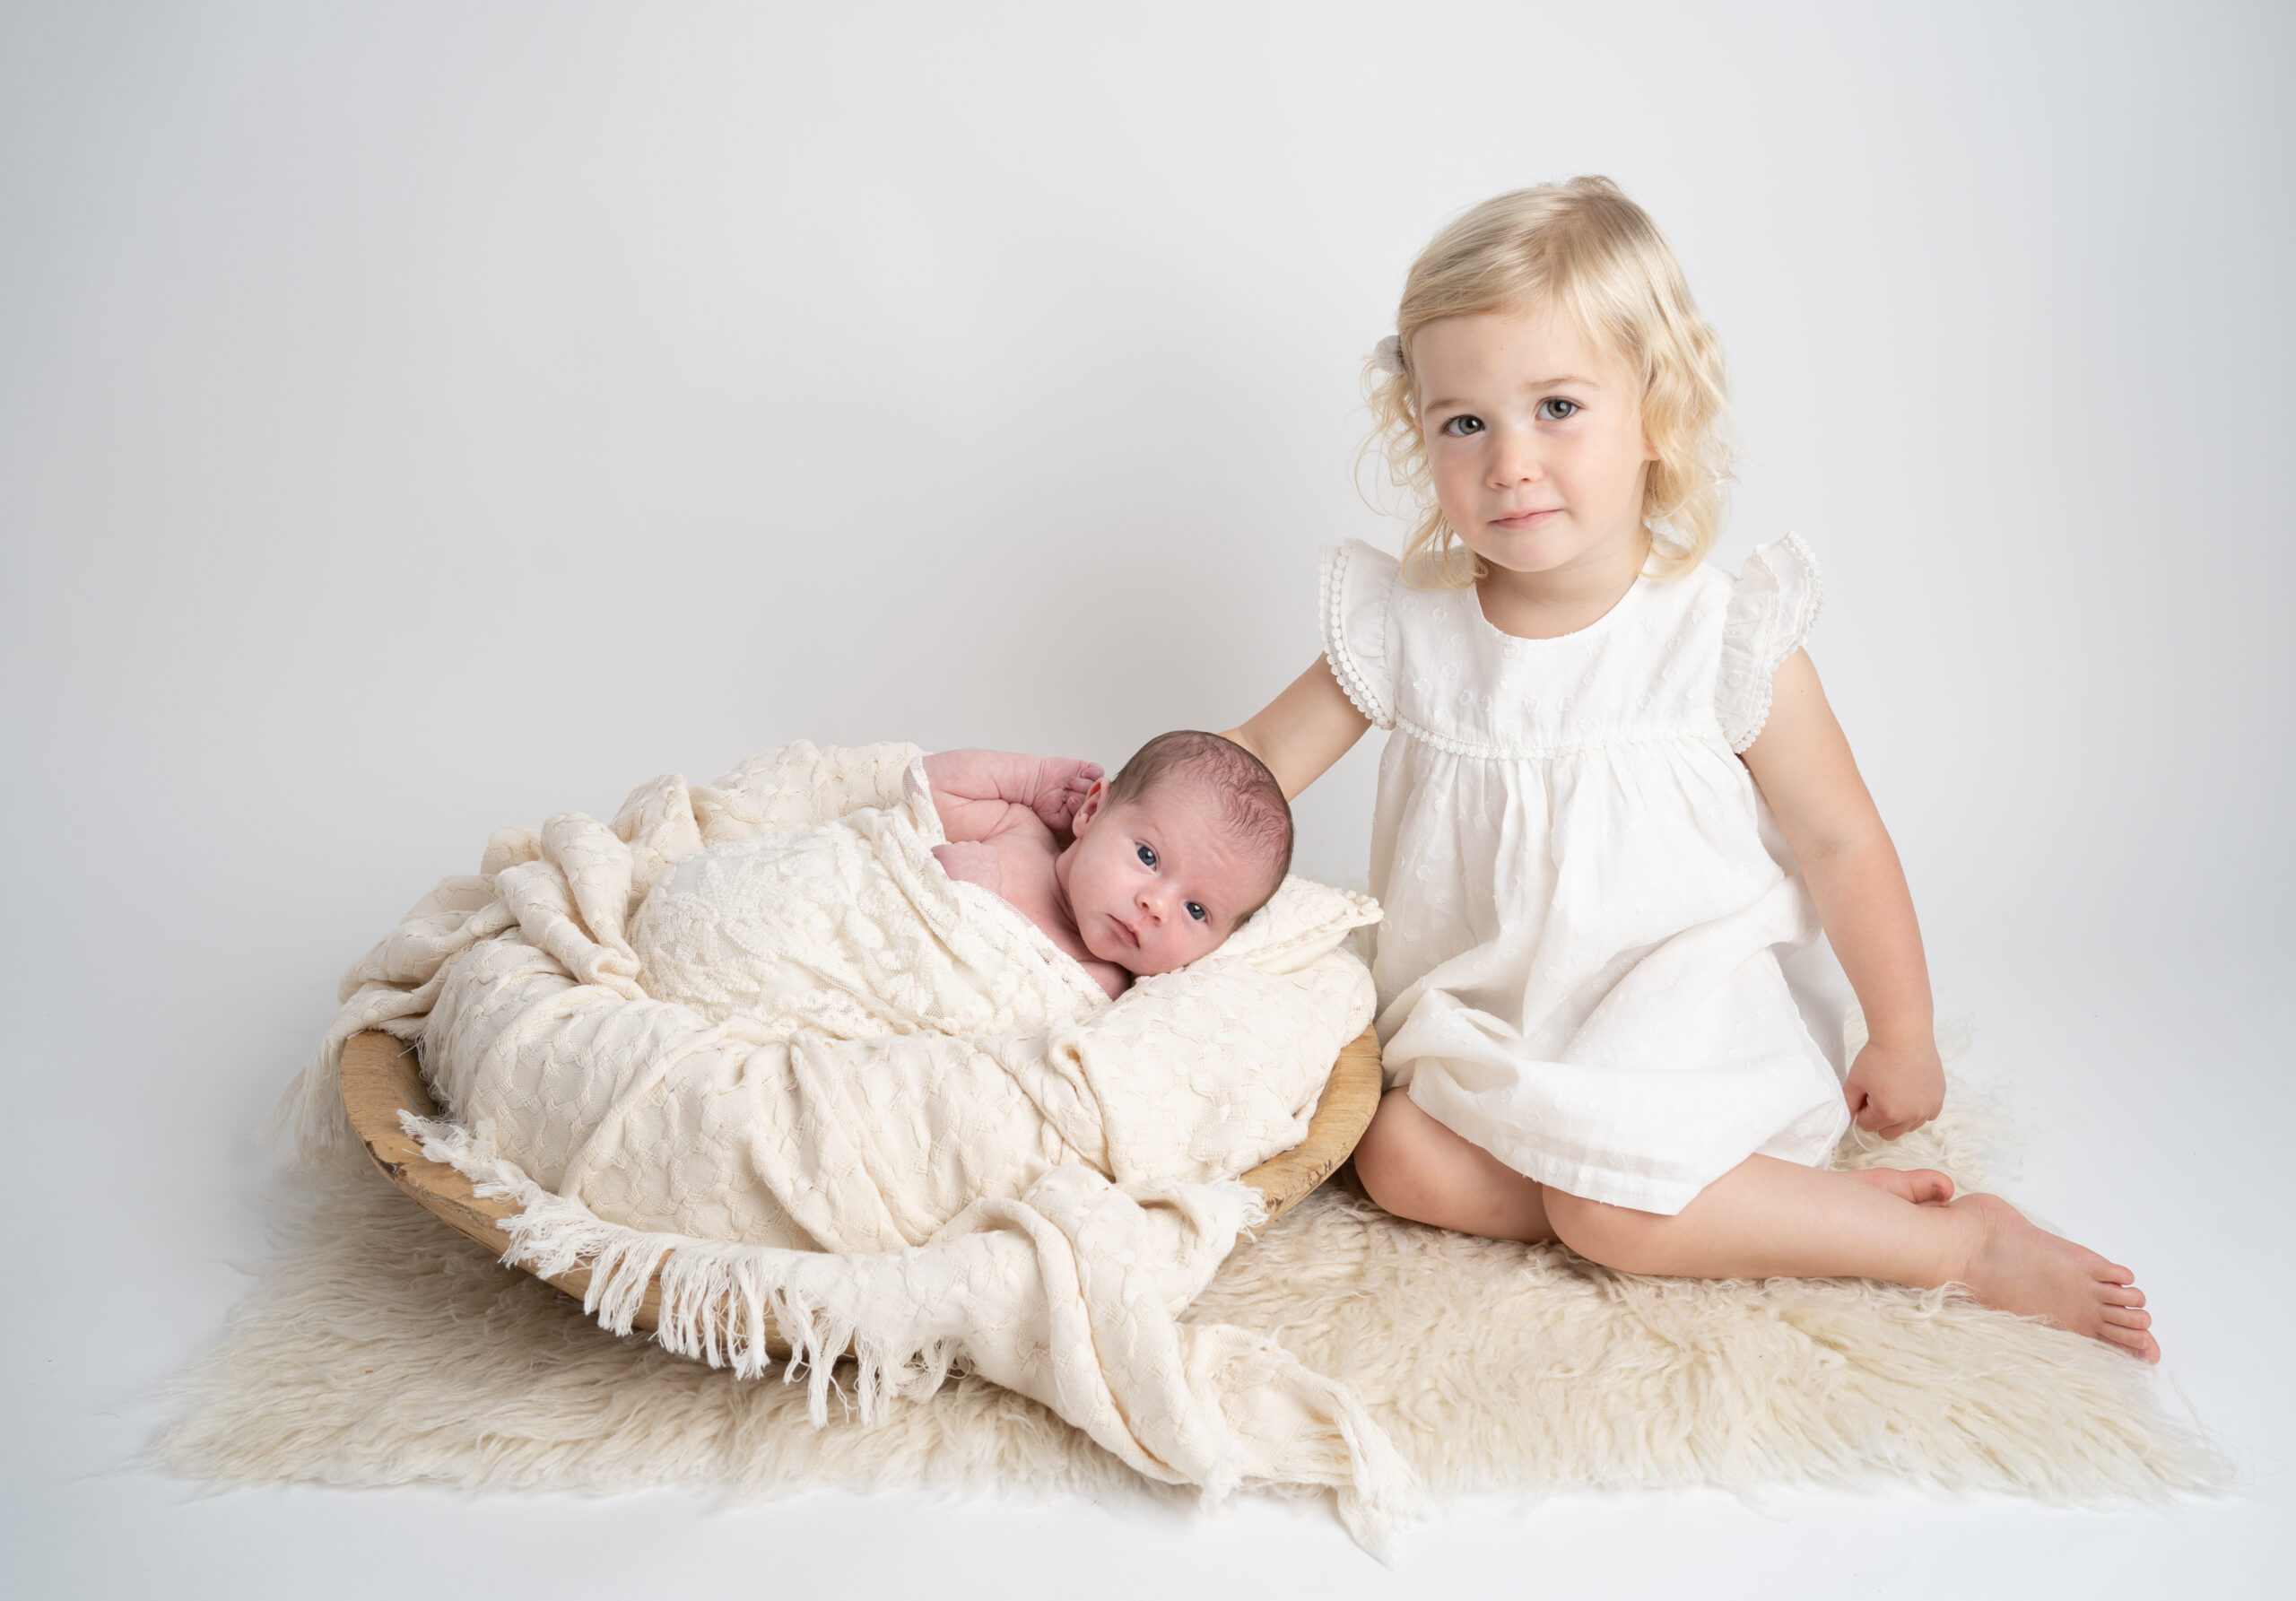 newborn baby in a basket with her sister kneeling by